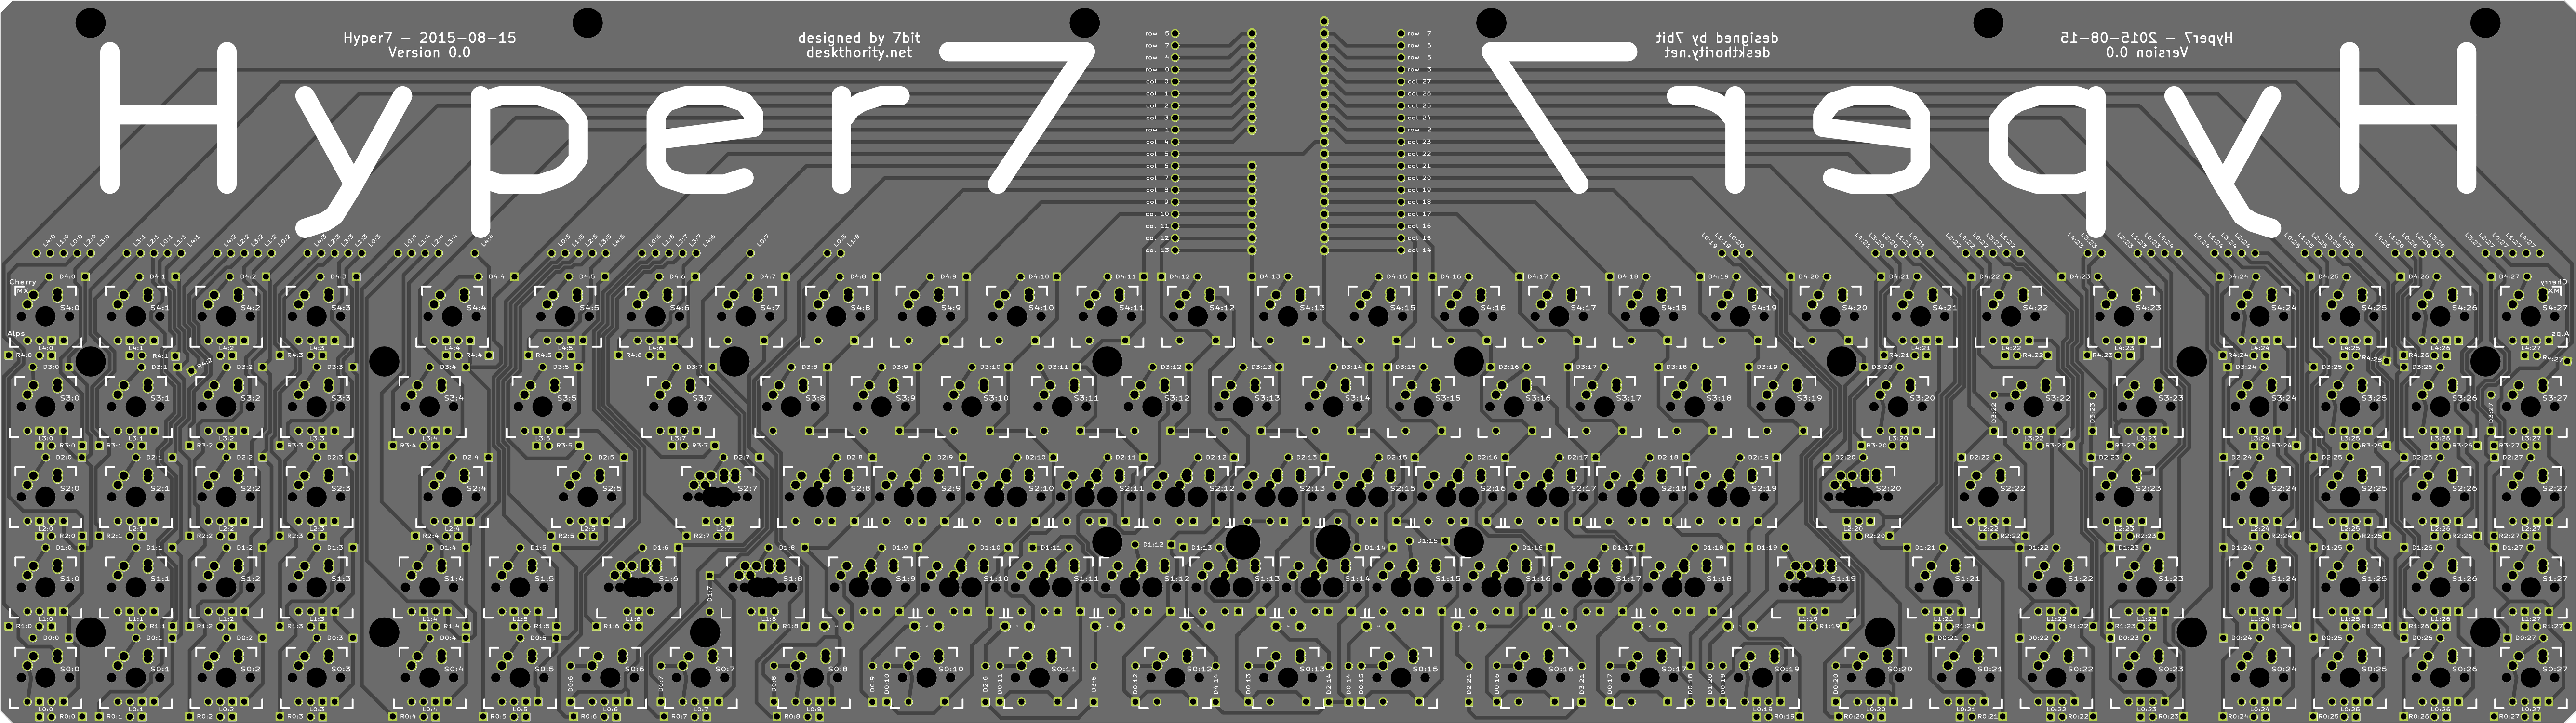 Hyper7_PCB_front.png